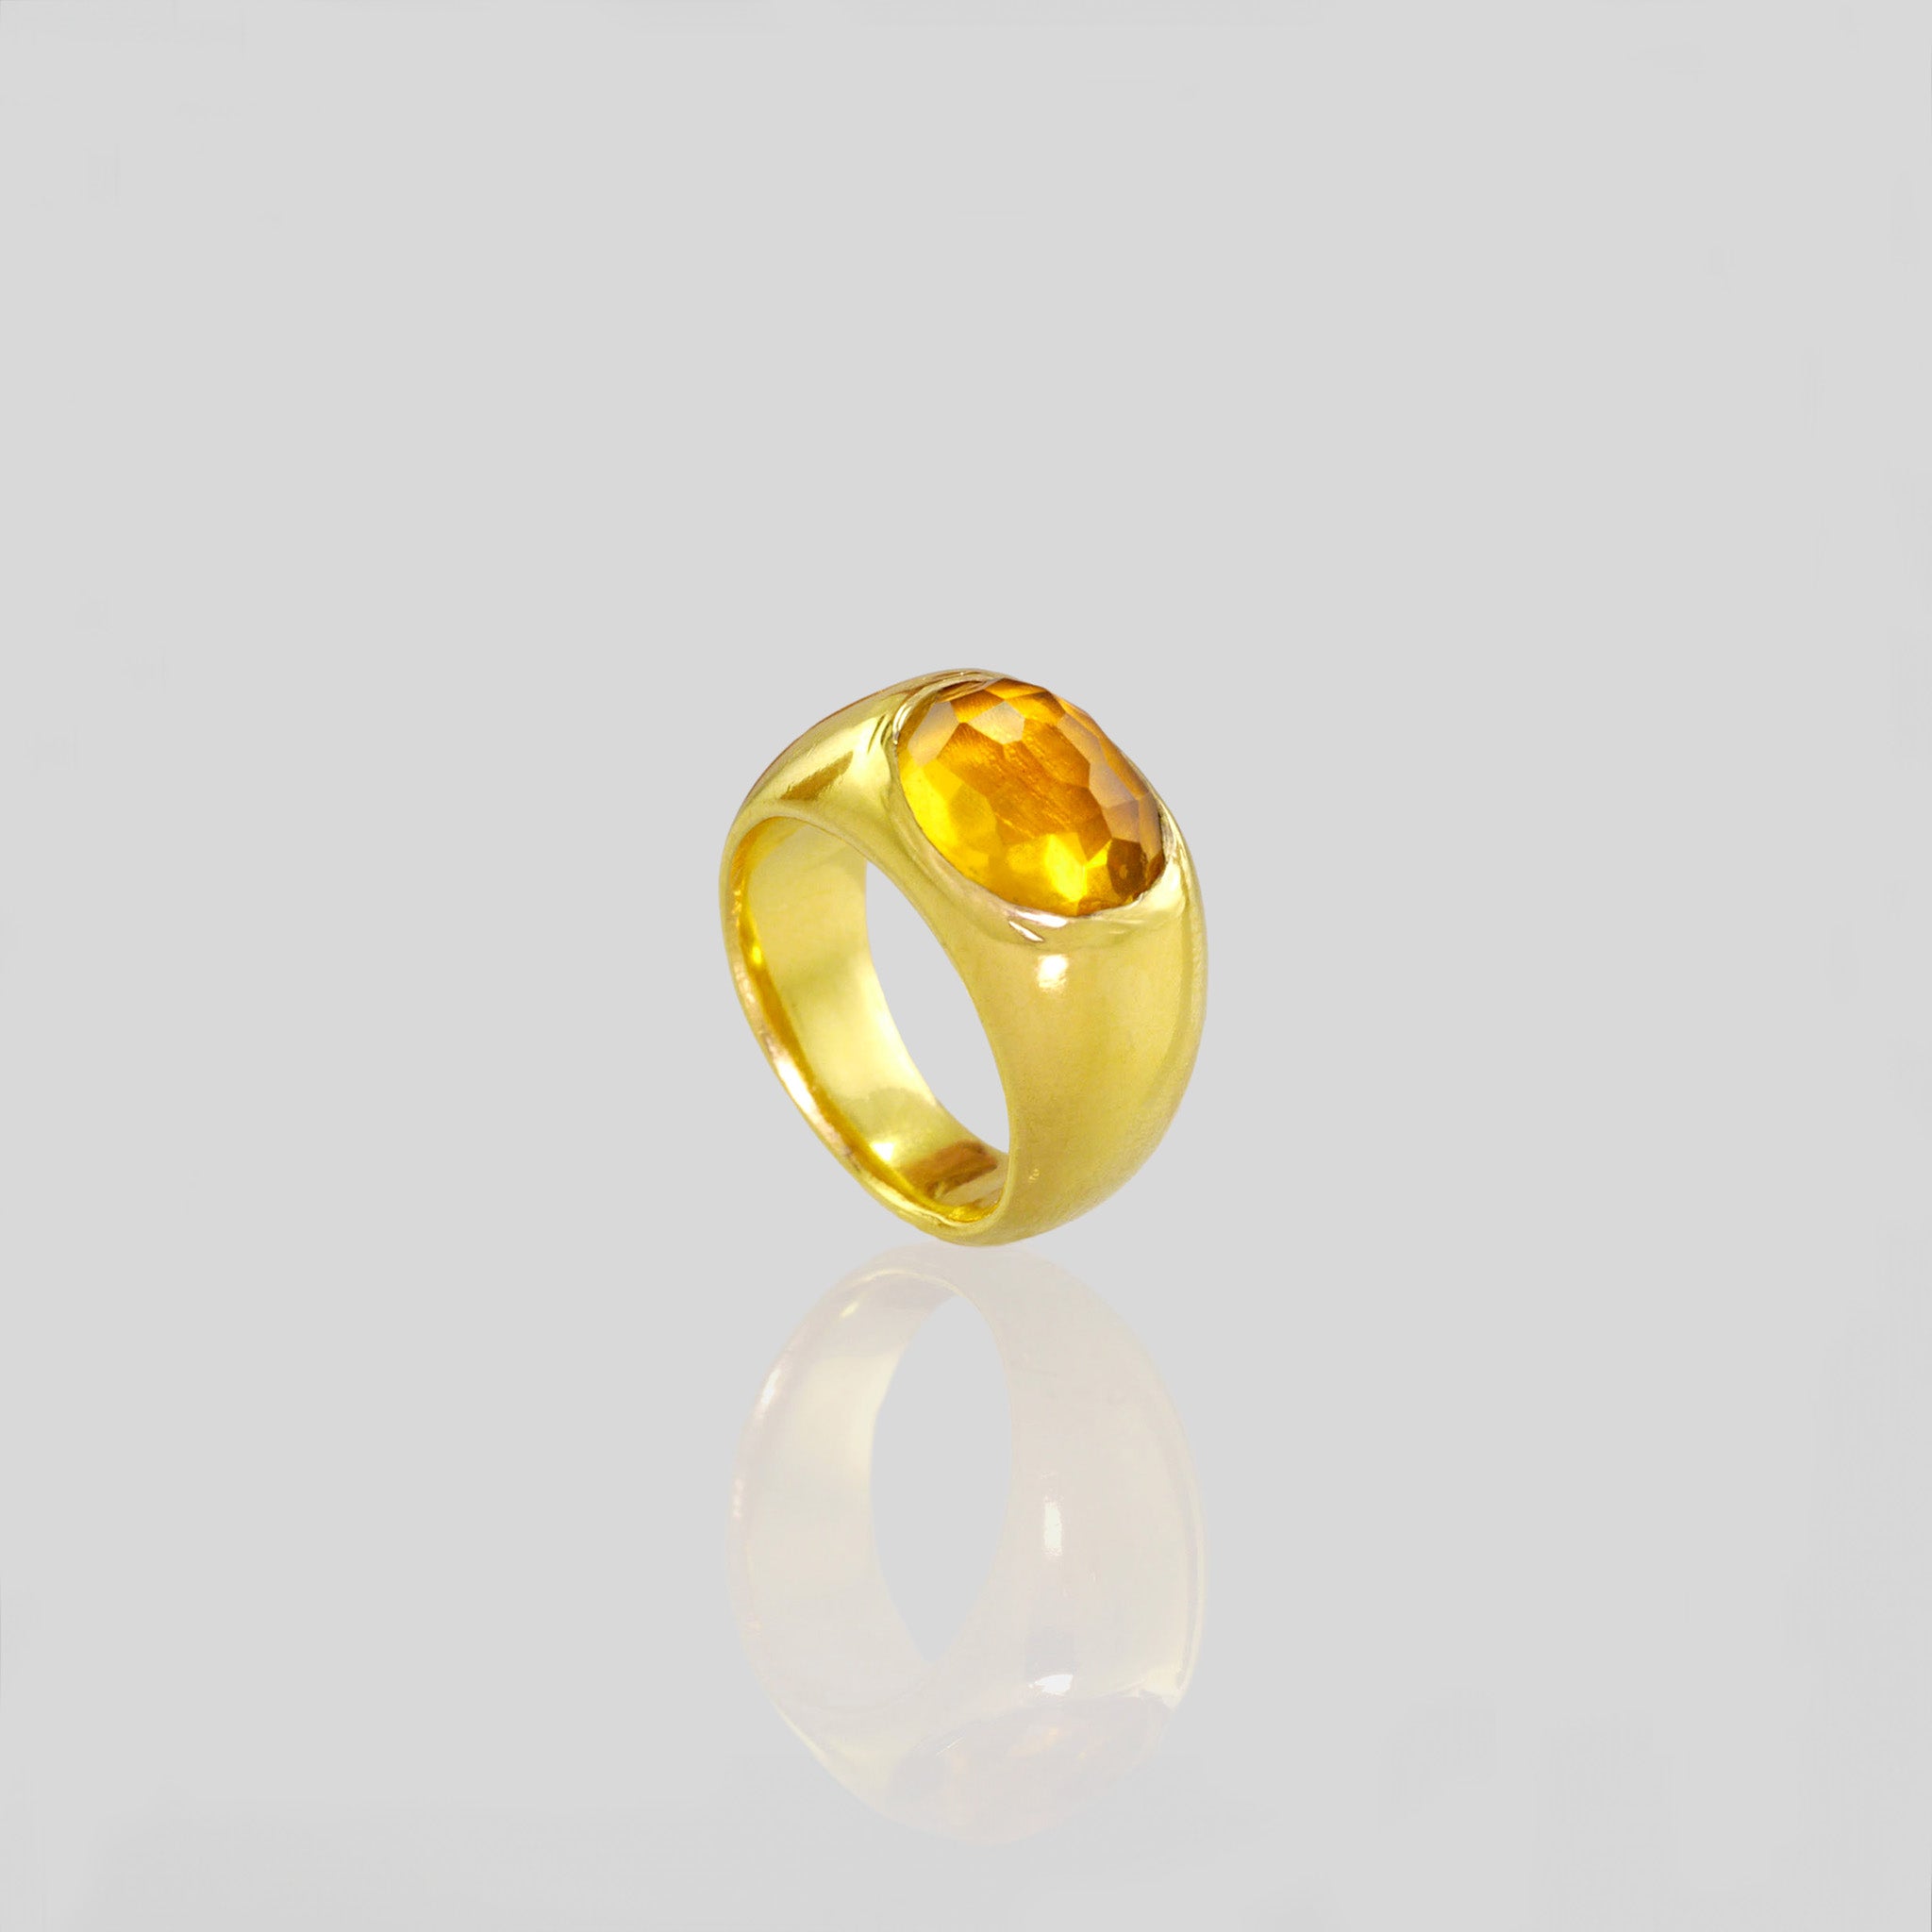 A timeless gold oval ring adorned with a captivating Citrine gemstone. This classic piece exudes traditional elegance and is beloved for its enduring appeal.